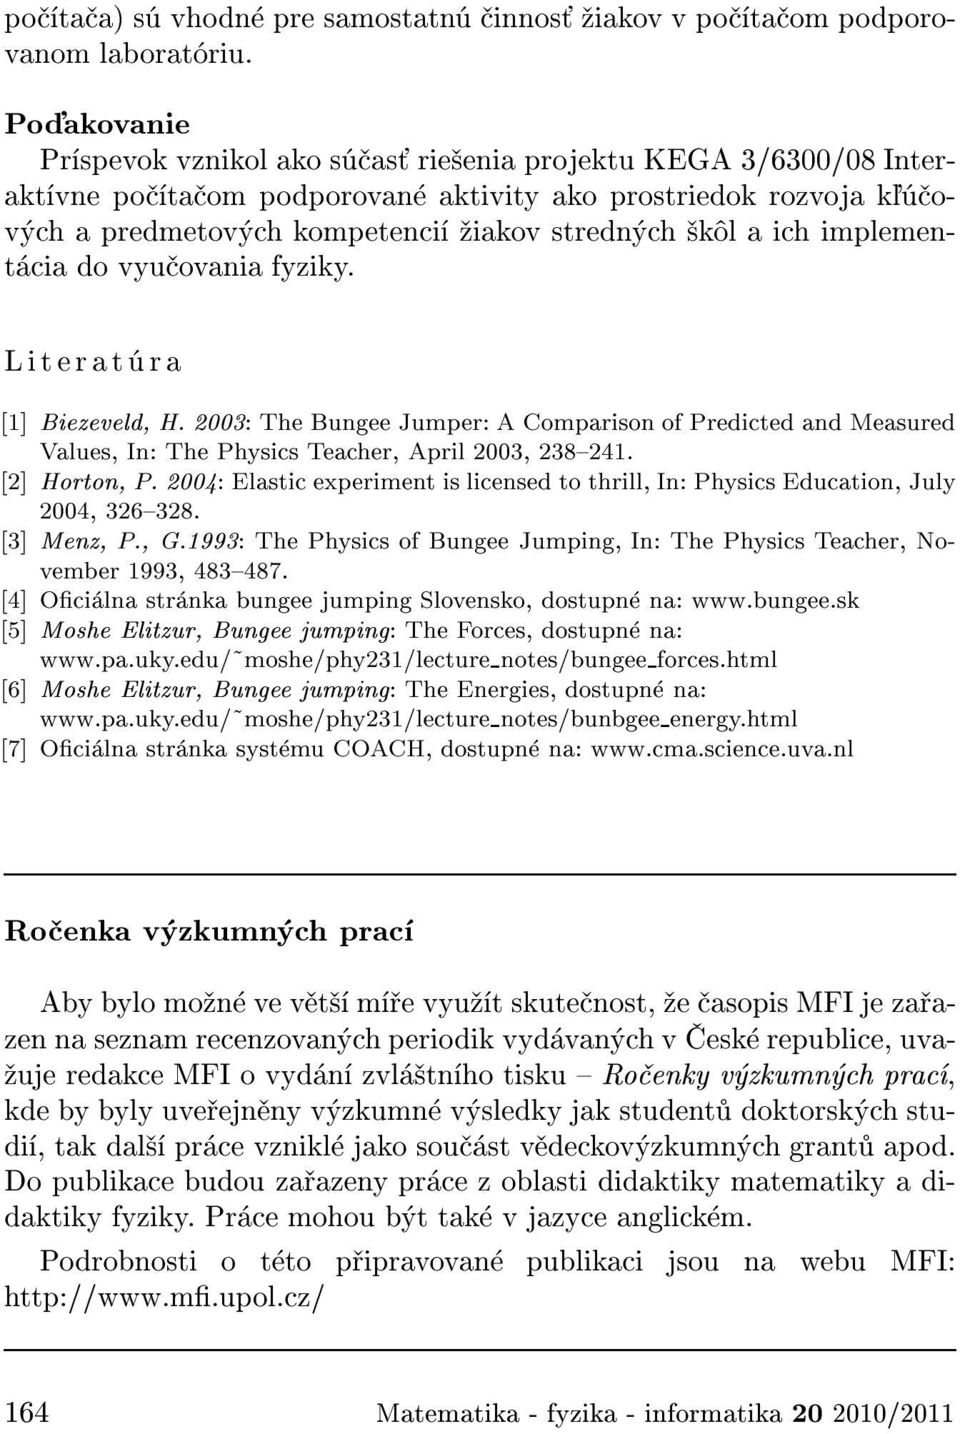 implement cia do vyu ovania fyziky. Literat ra [1] Biezeveld, H. 2003: The Bungee Jumper: A Comparison of Predicted and Measured Values, In: The Physics Teacher, April 2003, 238{241. [2] Horton, P.